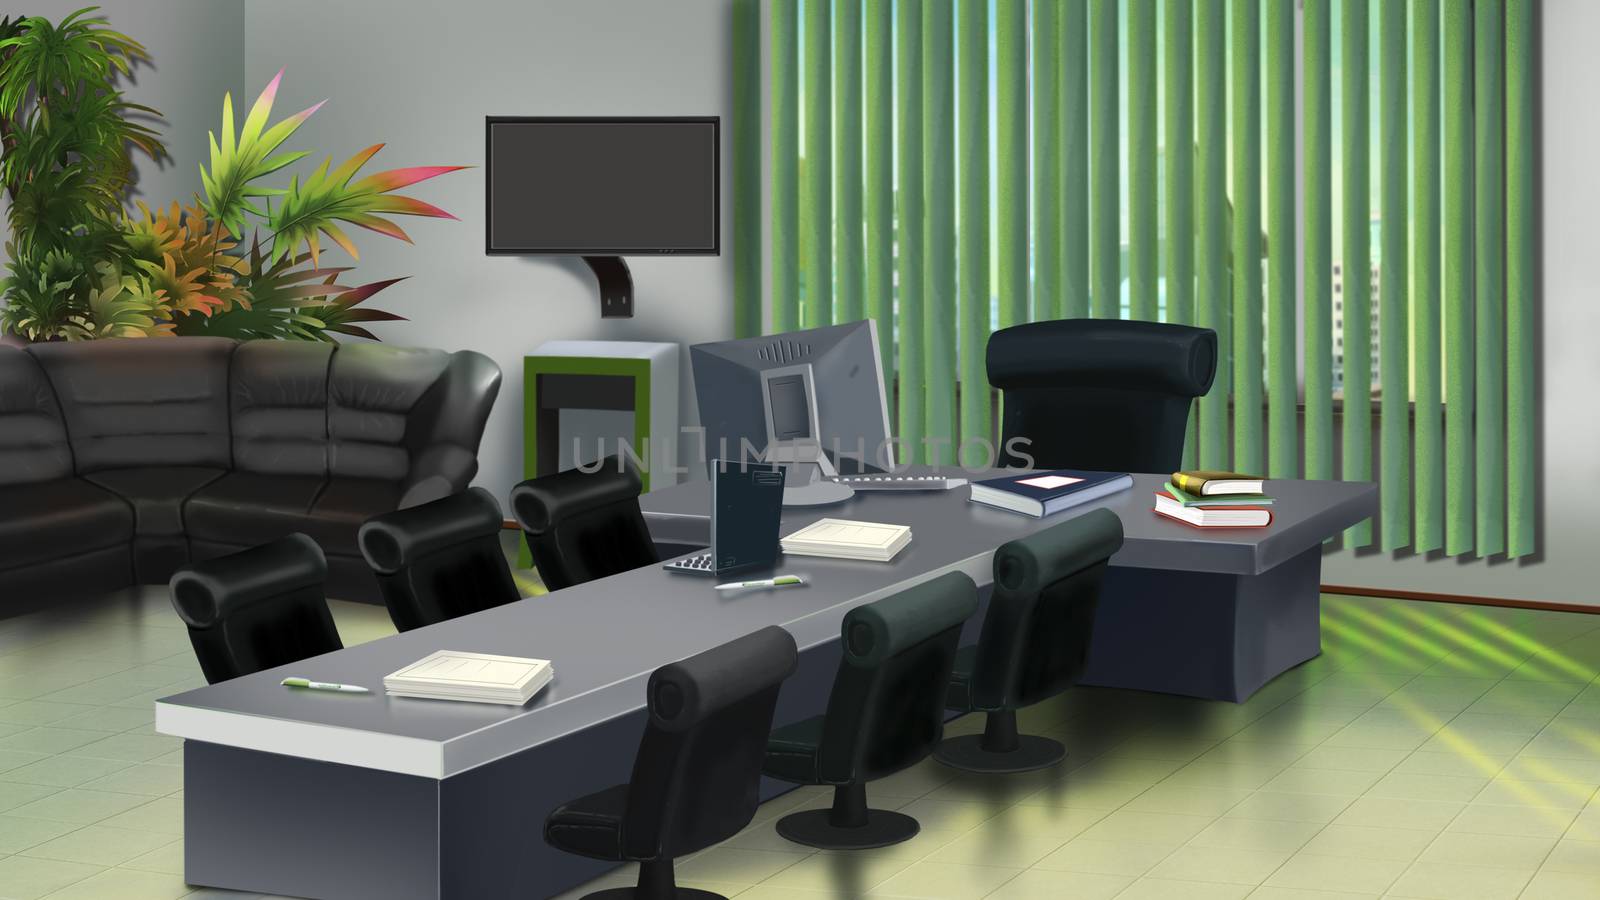 Digital painting of the Long grey table covered in computer and papers